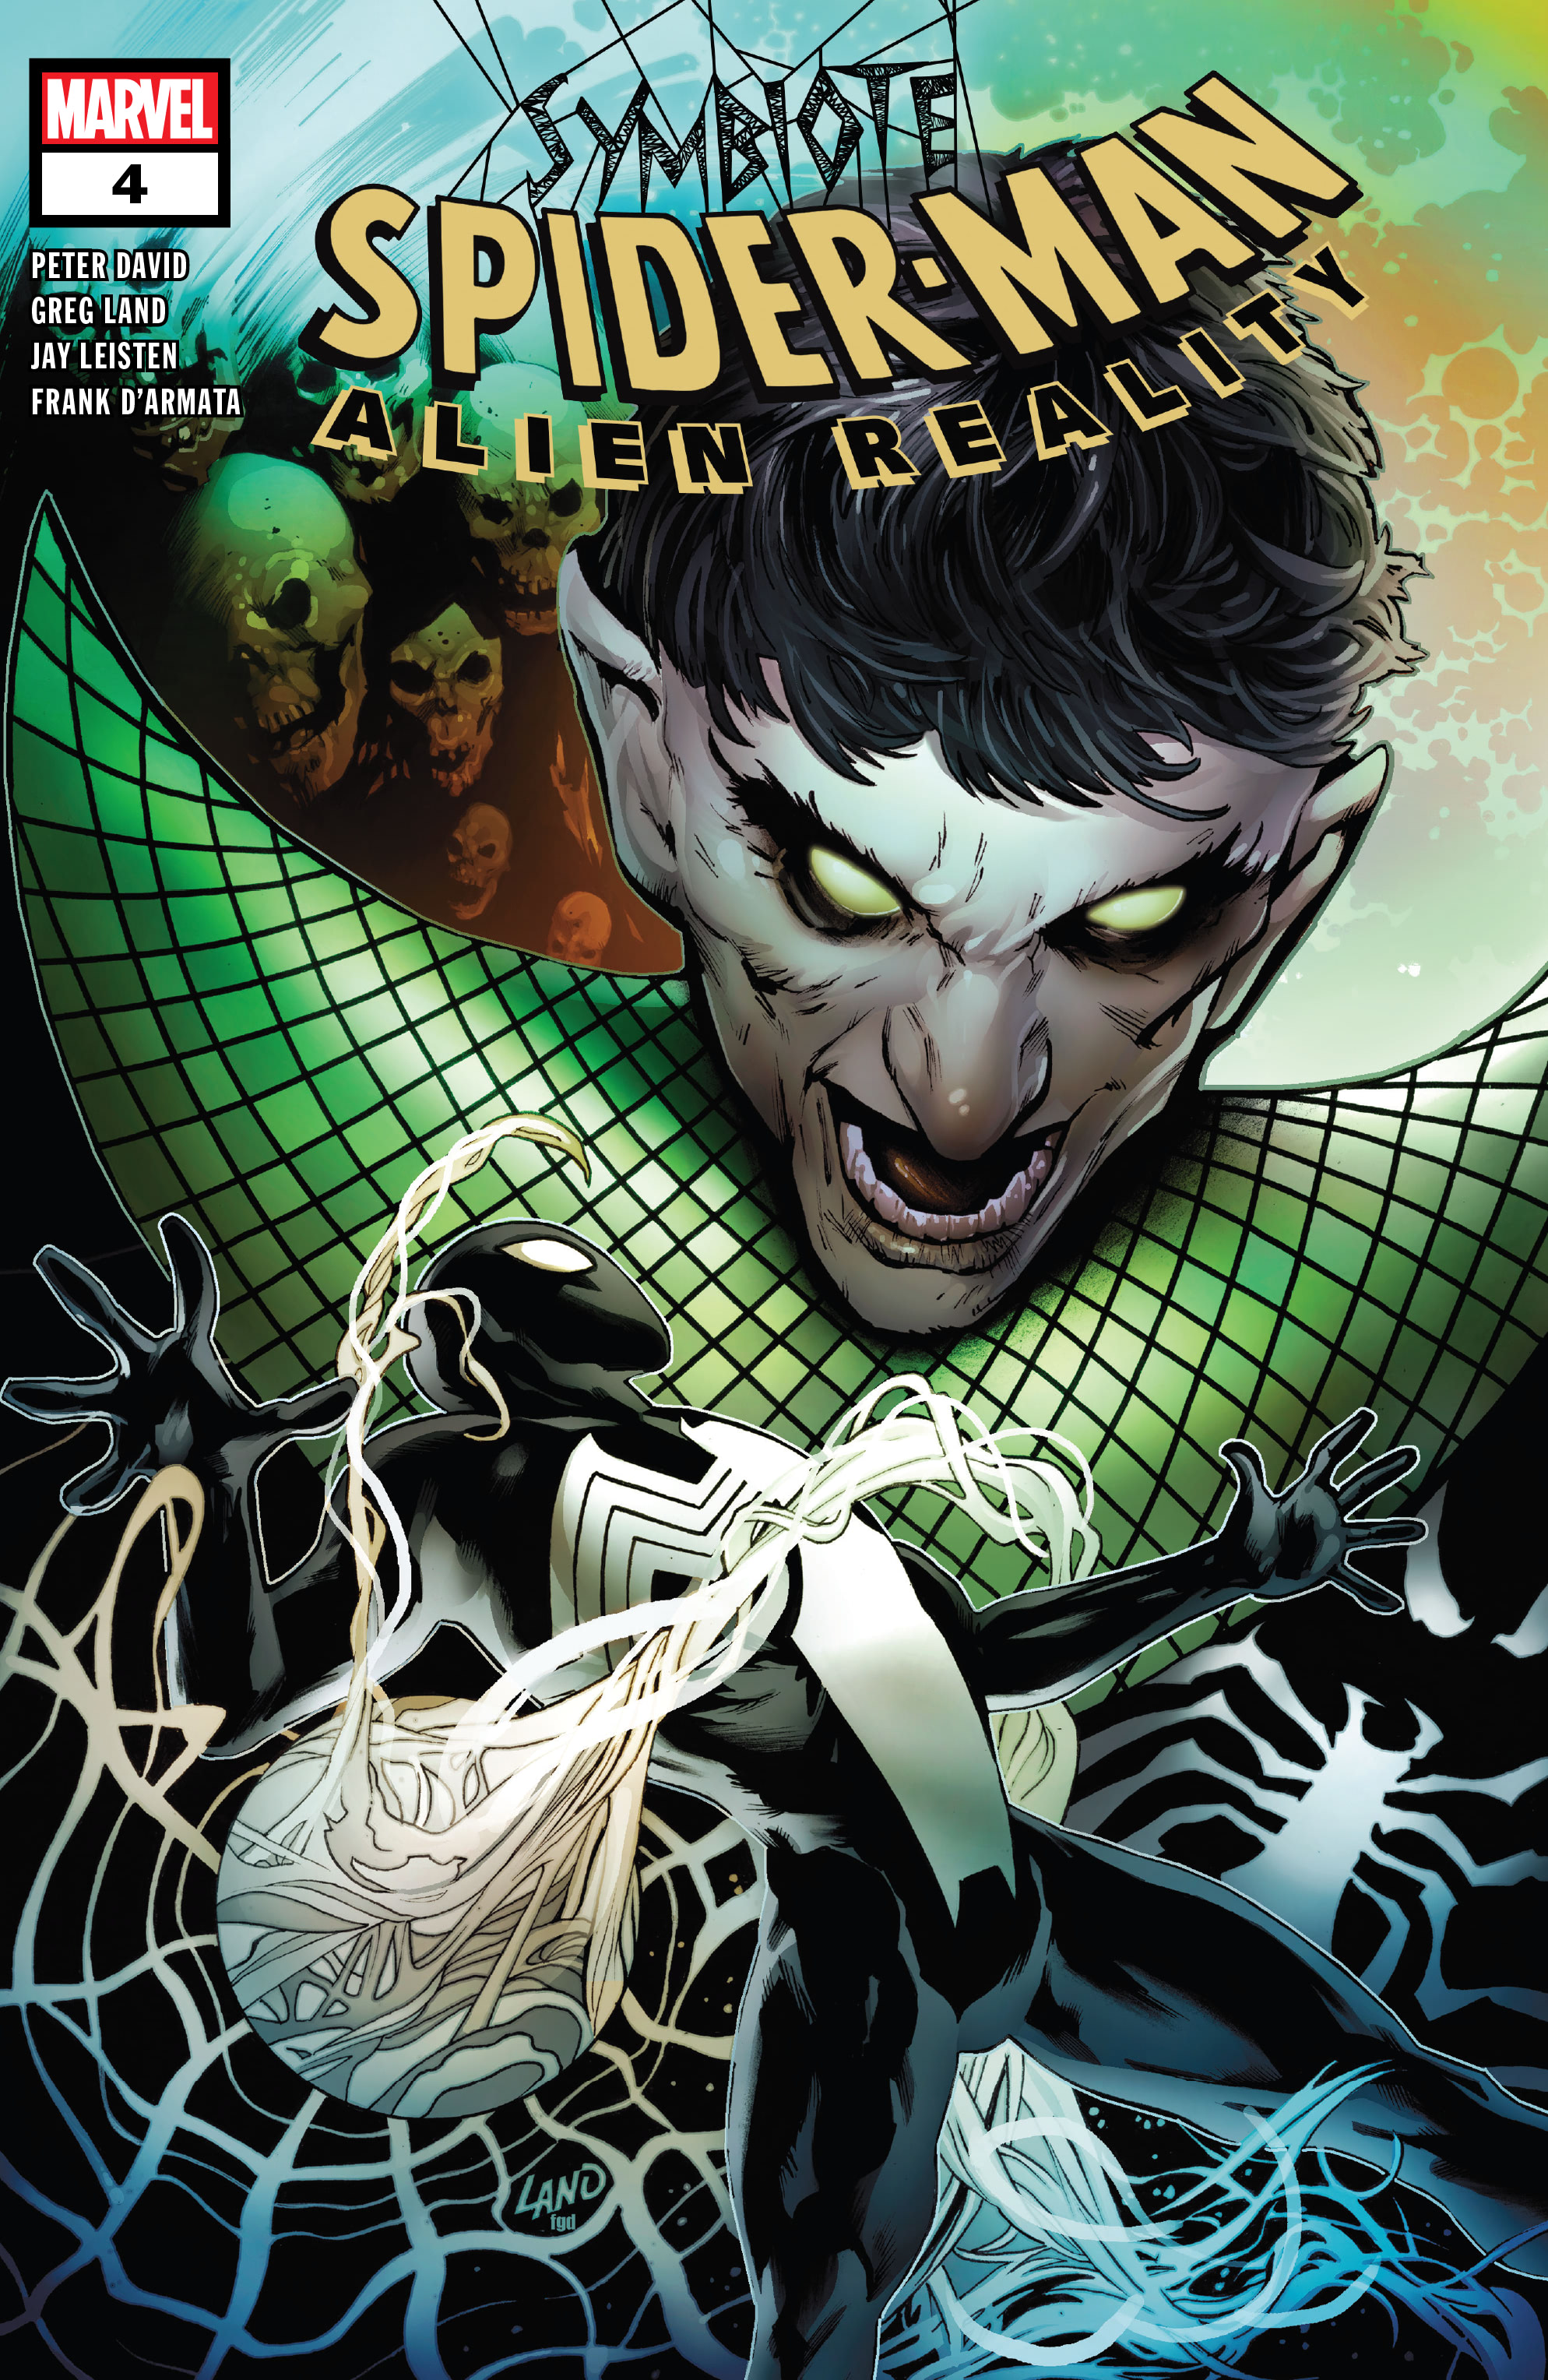 Read online Symbiote Spider-Man: Alien Reality comic -  Issue #4 - 1